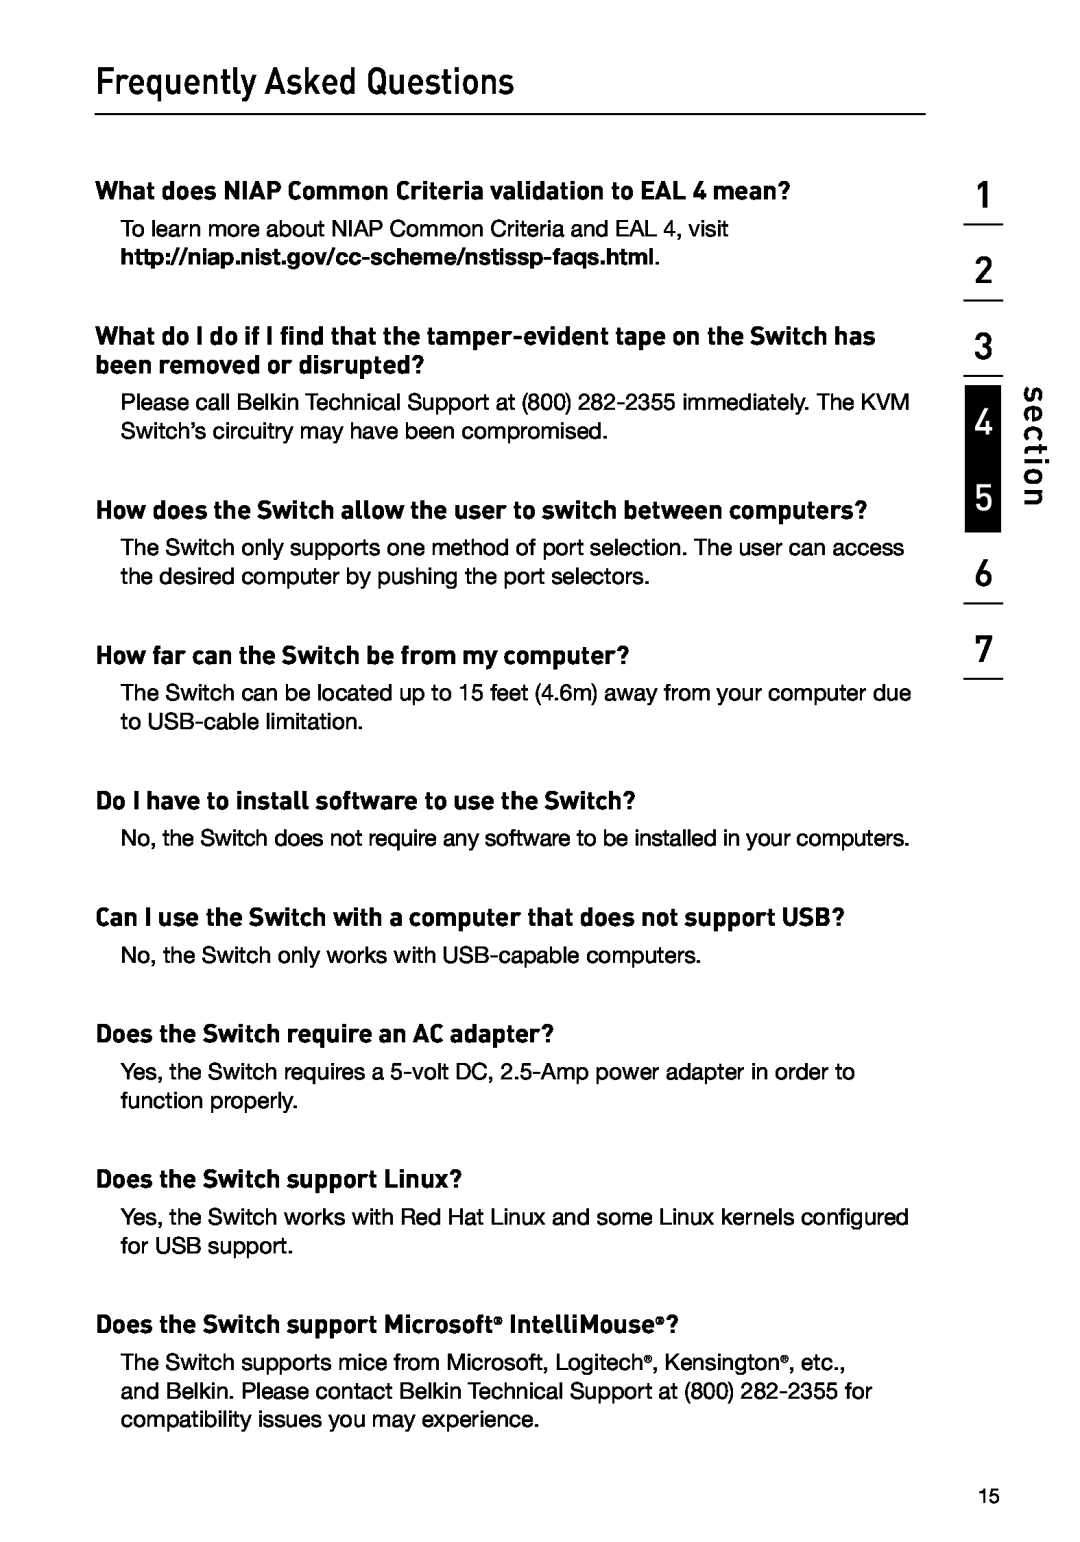 Belkin P75209 manual Frequently Asked Questions, section 